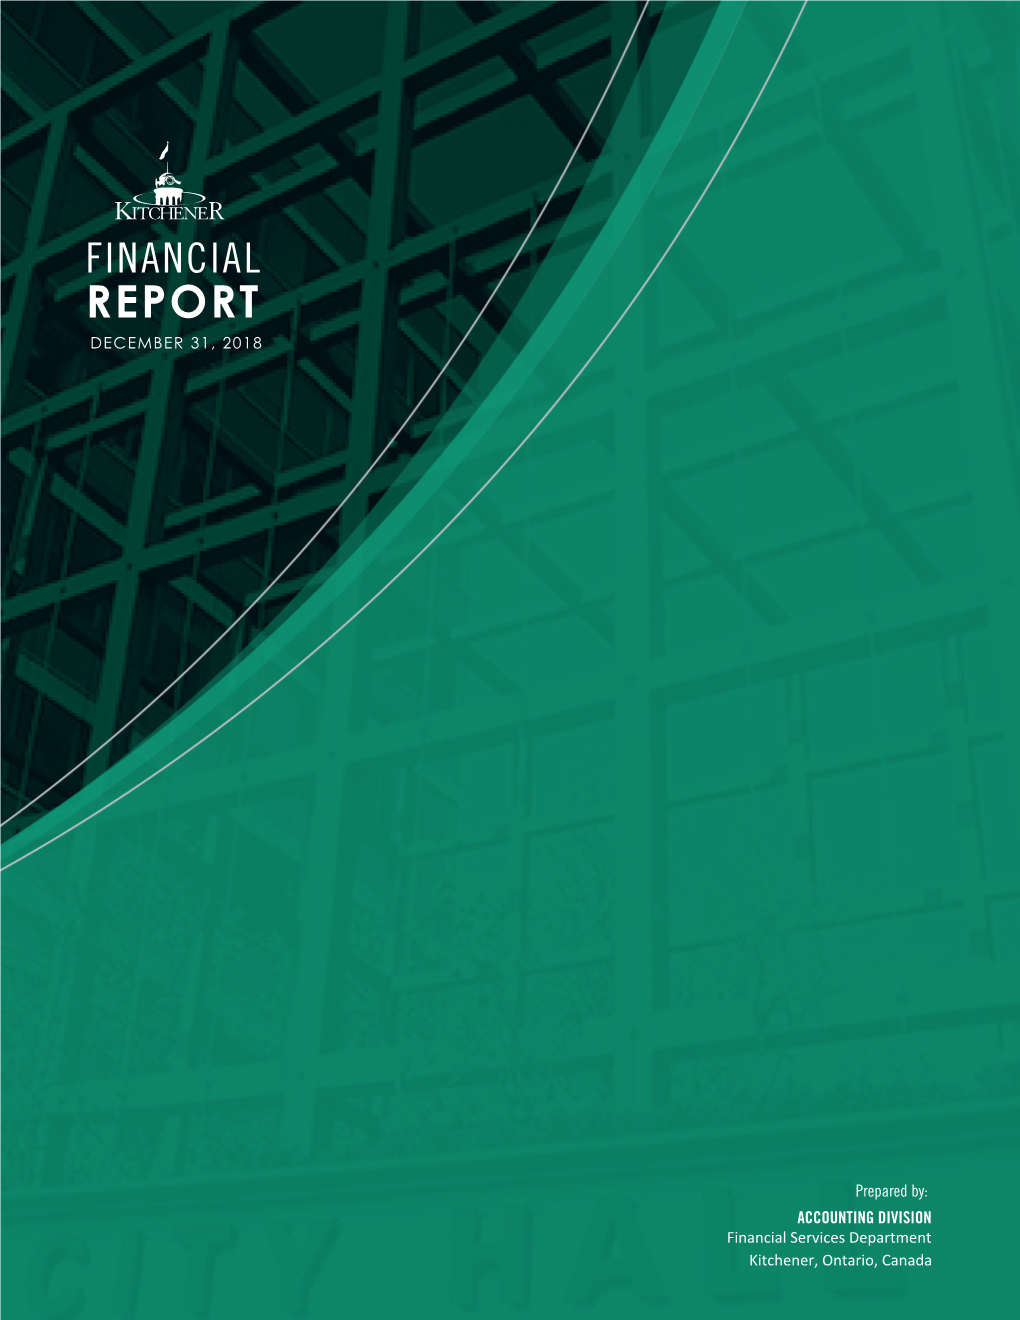 City of Kitchener Financial Report 2018